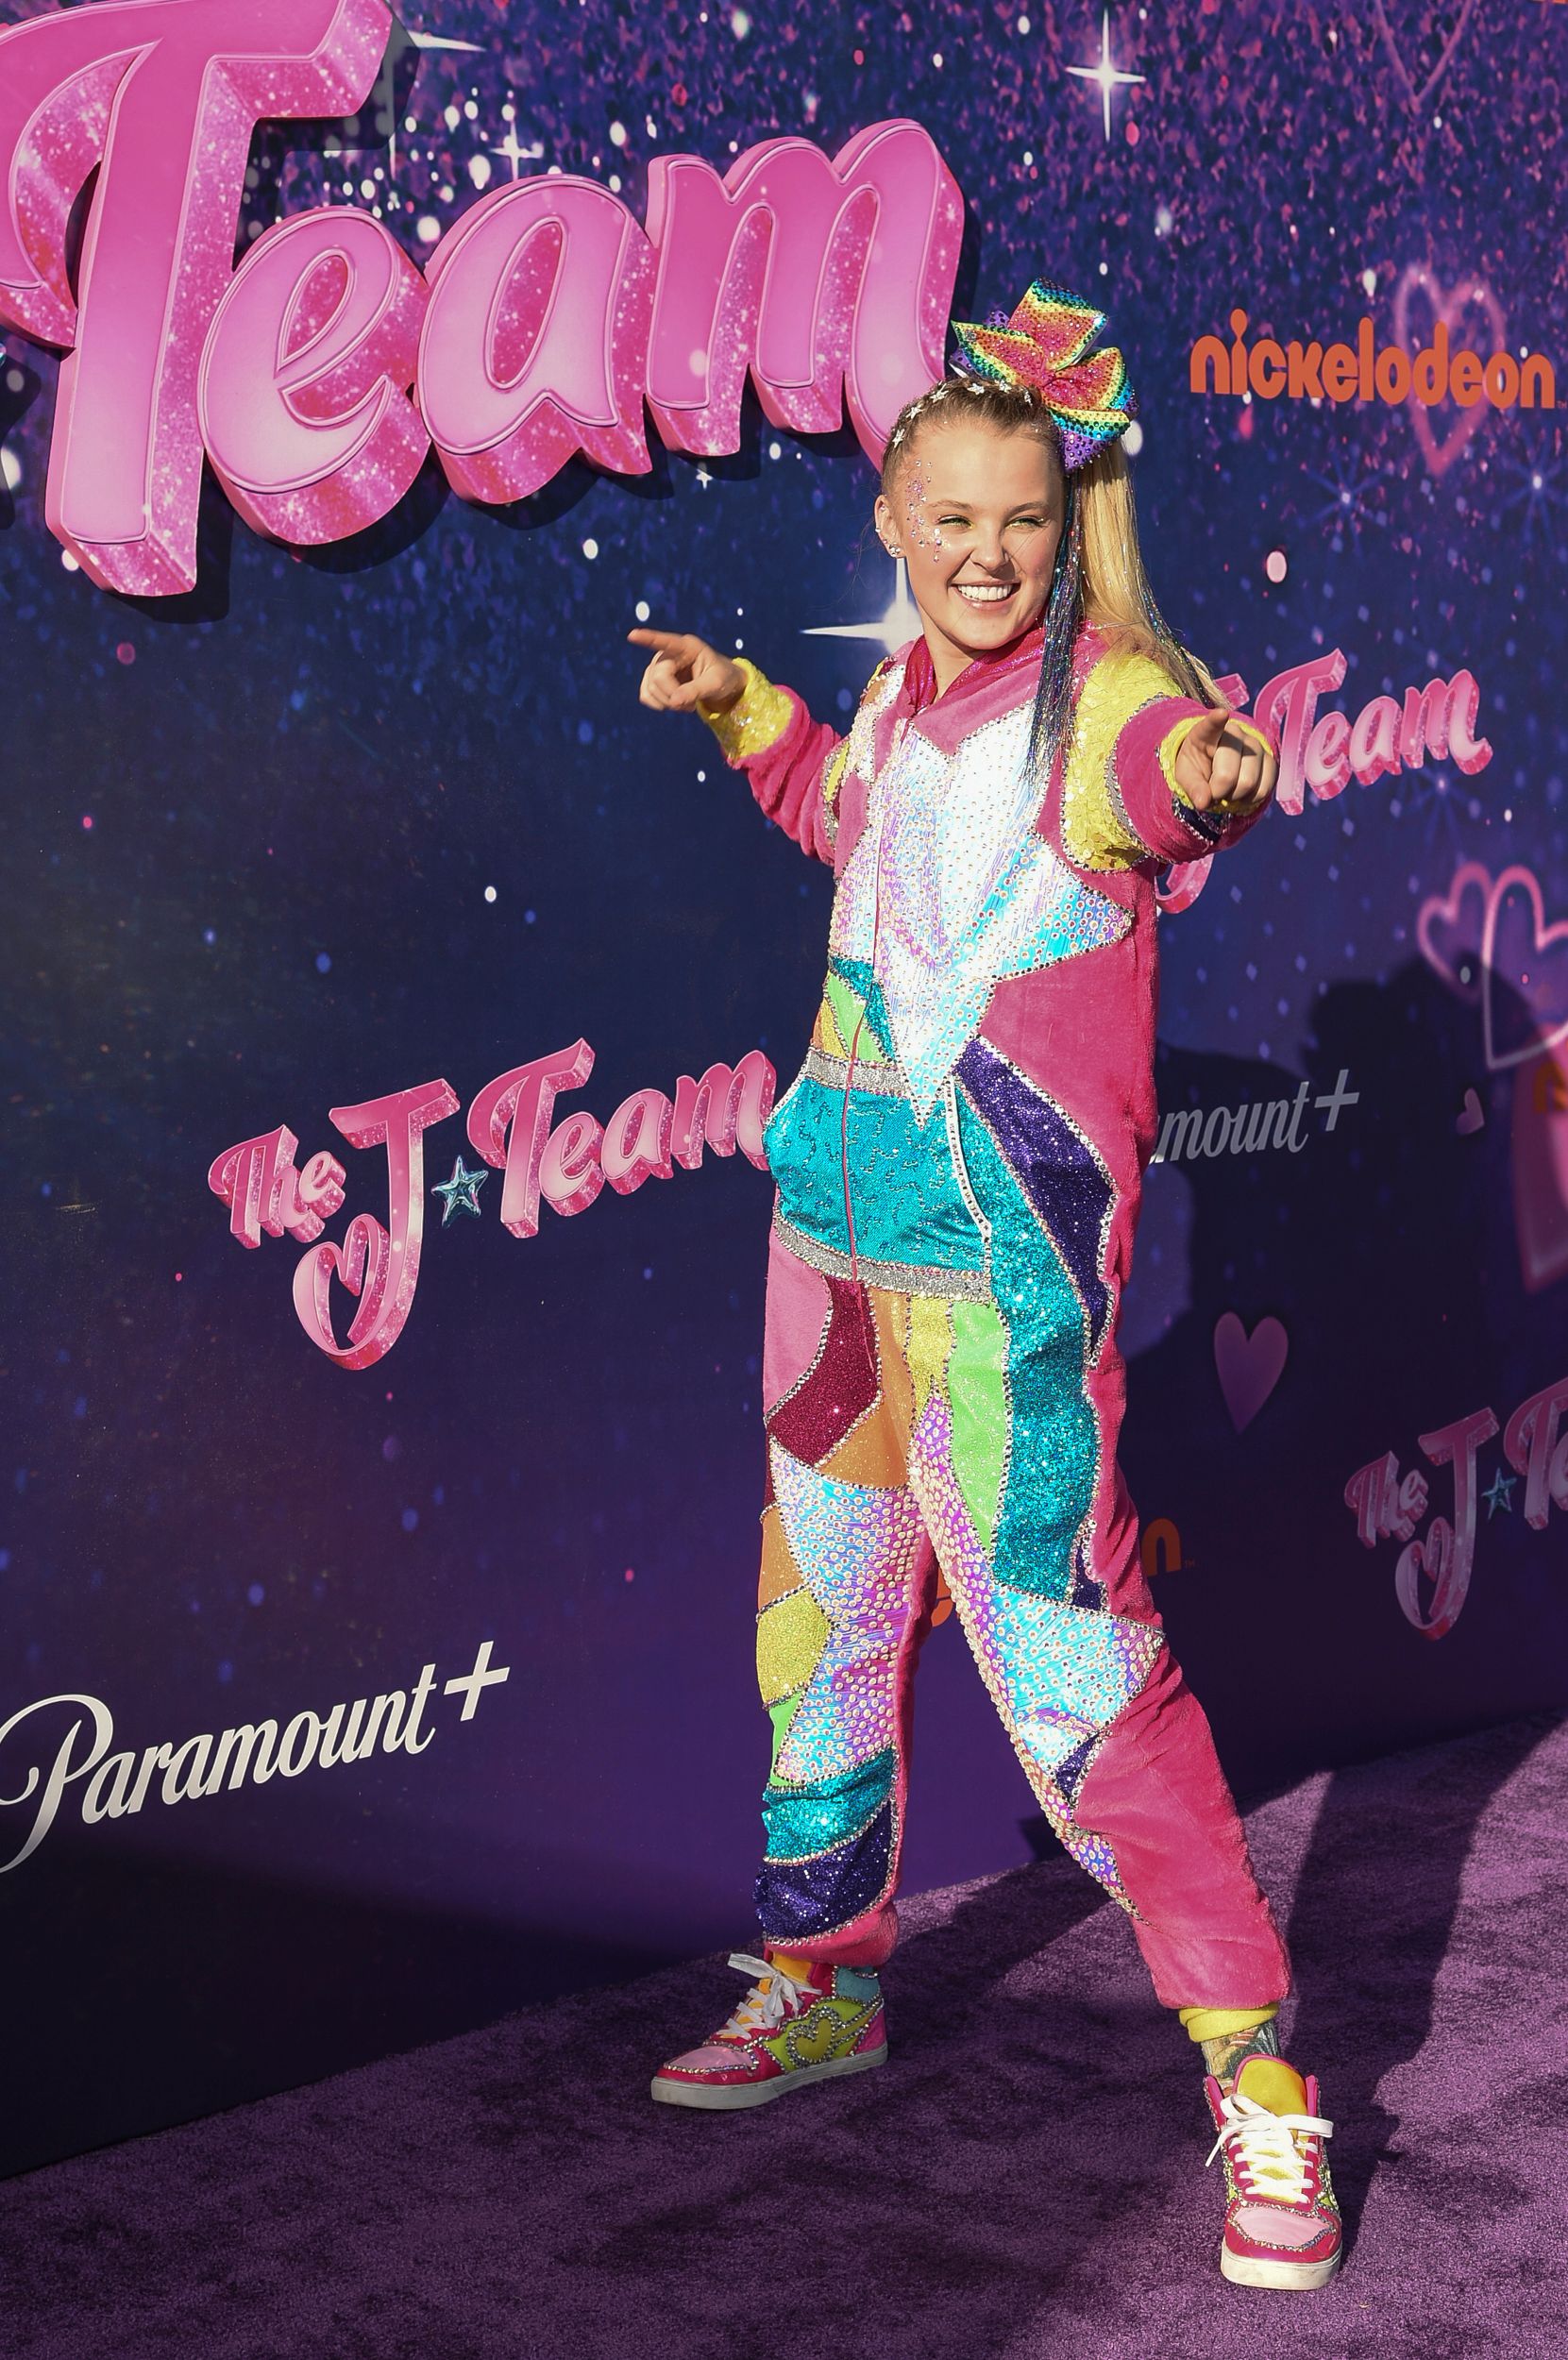 JoJo Siwa's Wildest, Most Colorful Fashion Looks of All Time: Pics